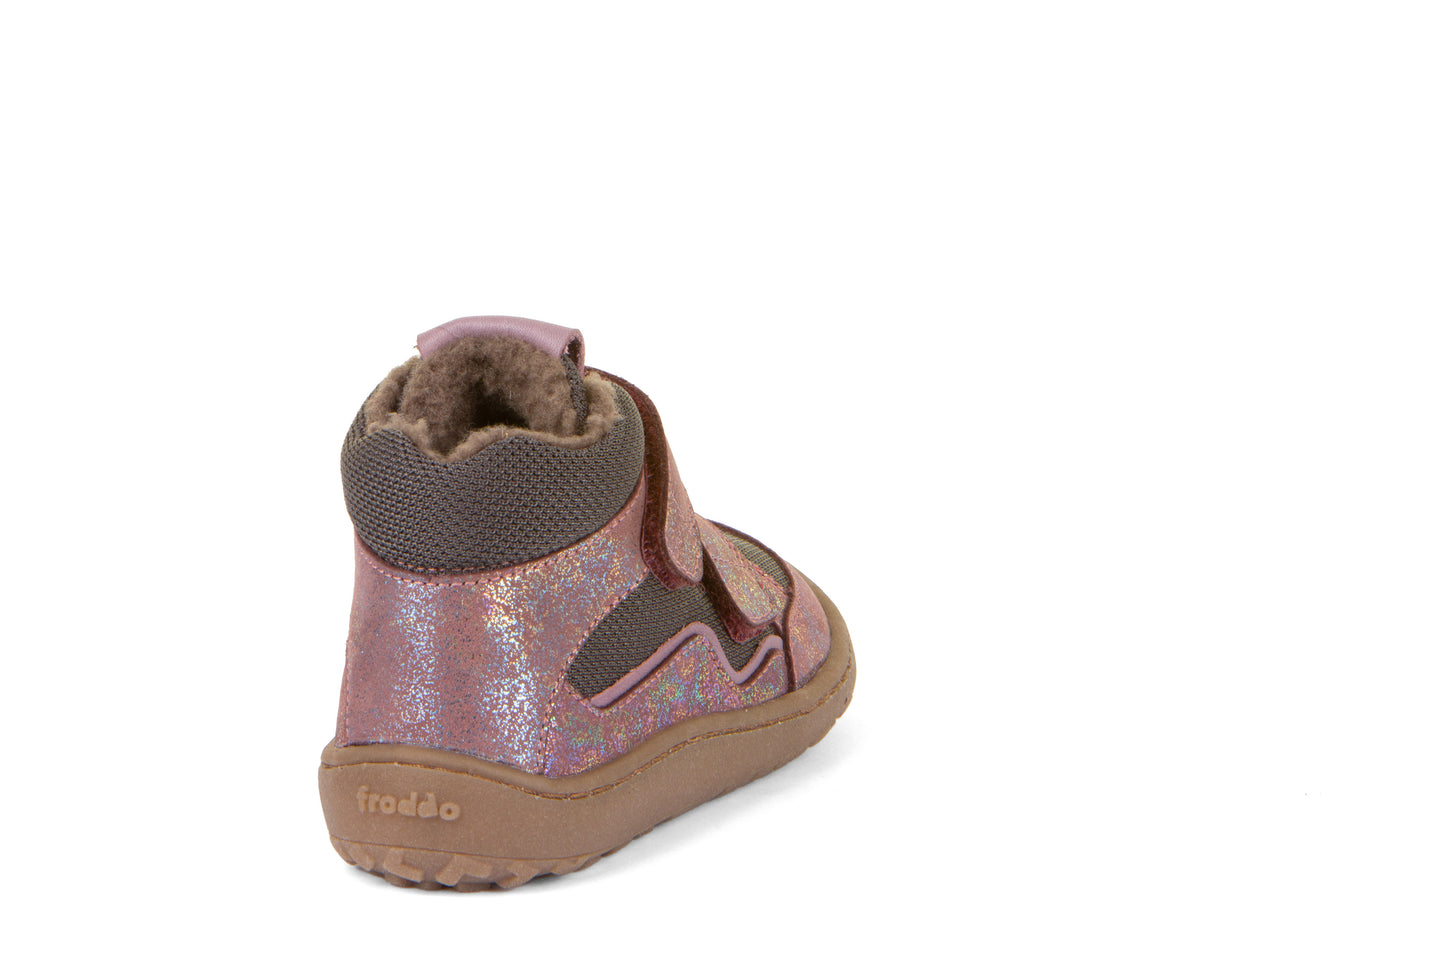 Froddo Children's Ankle Boots - BAREFOOT WINTER WOOL - Pink